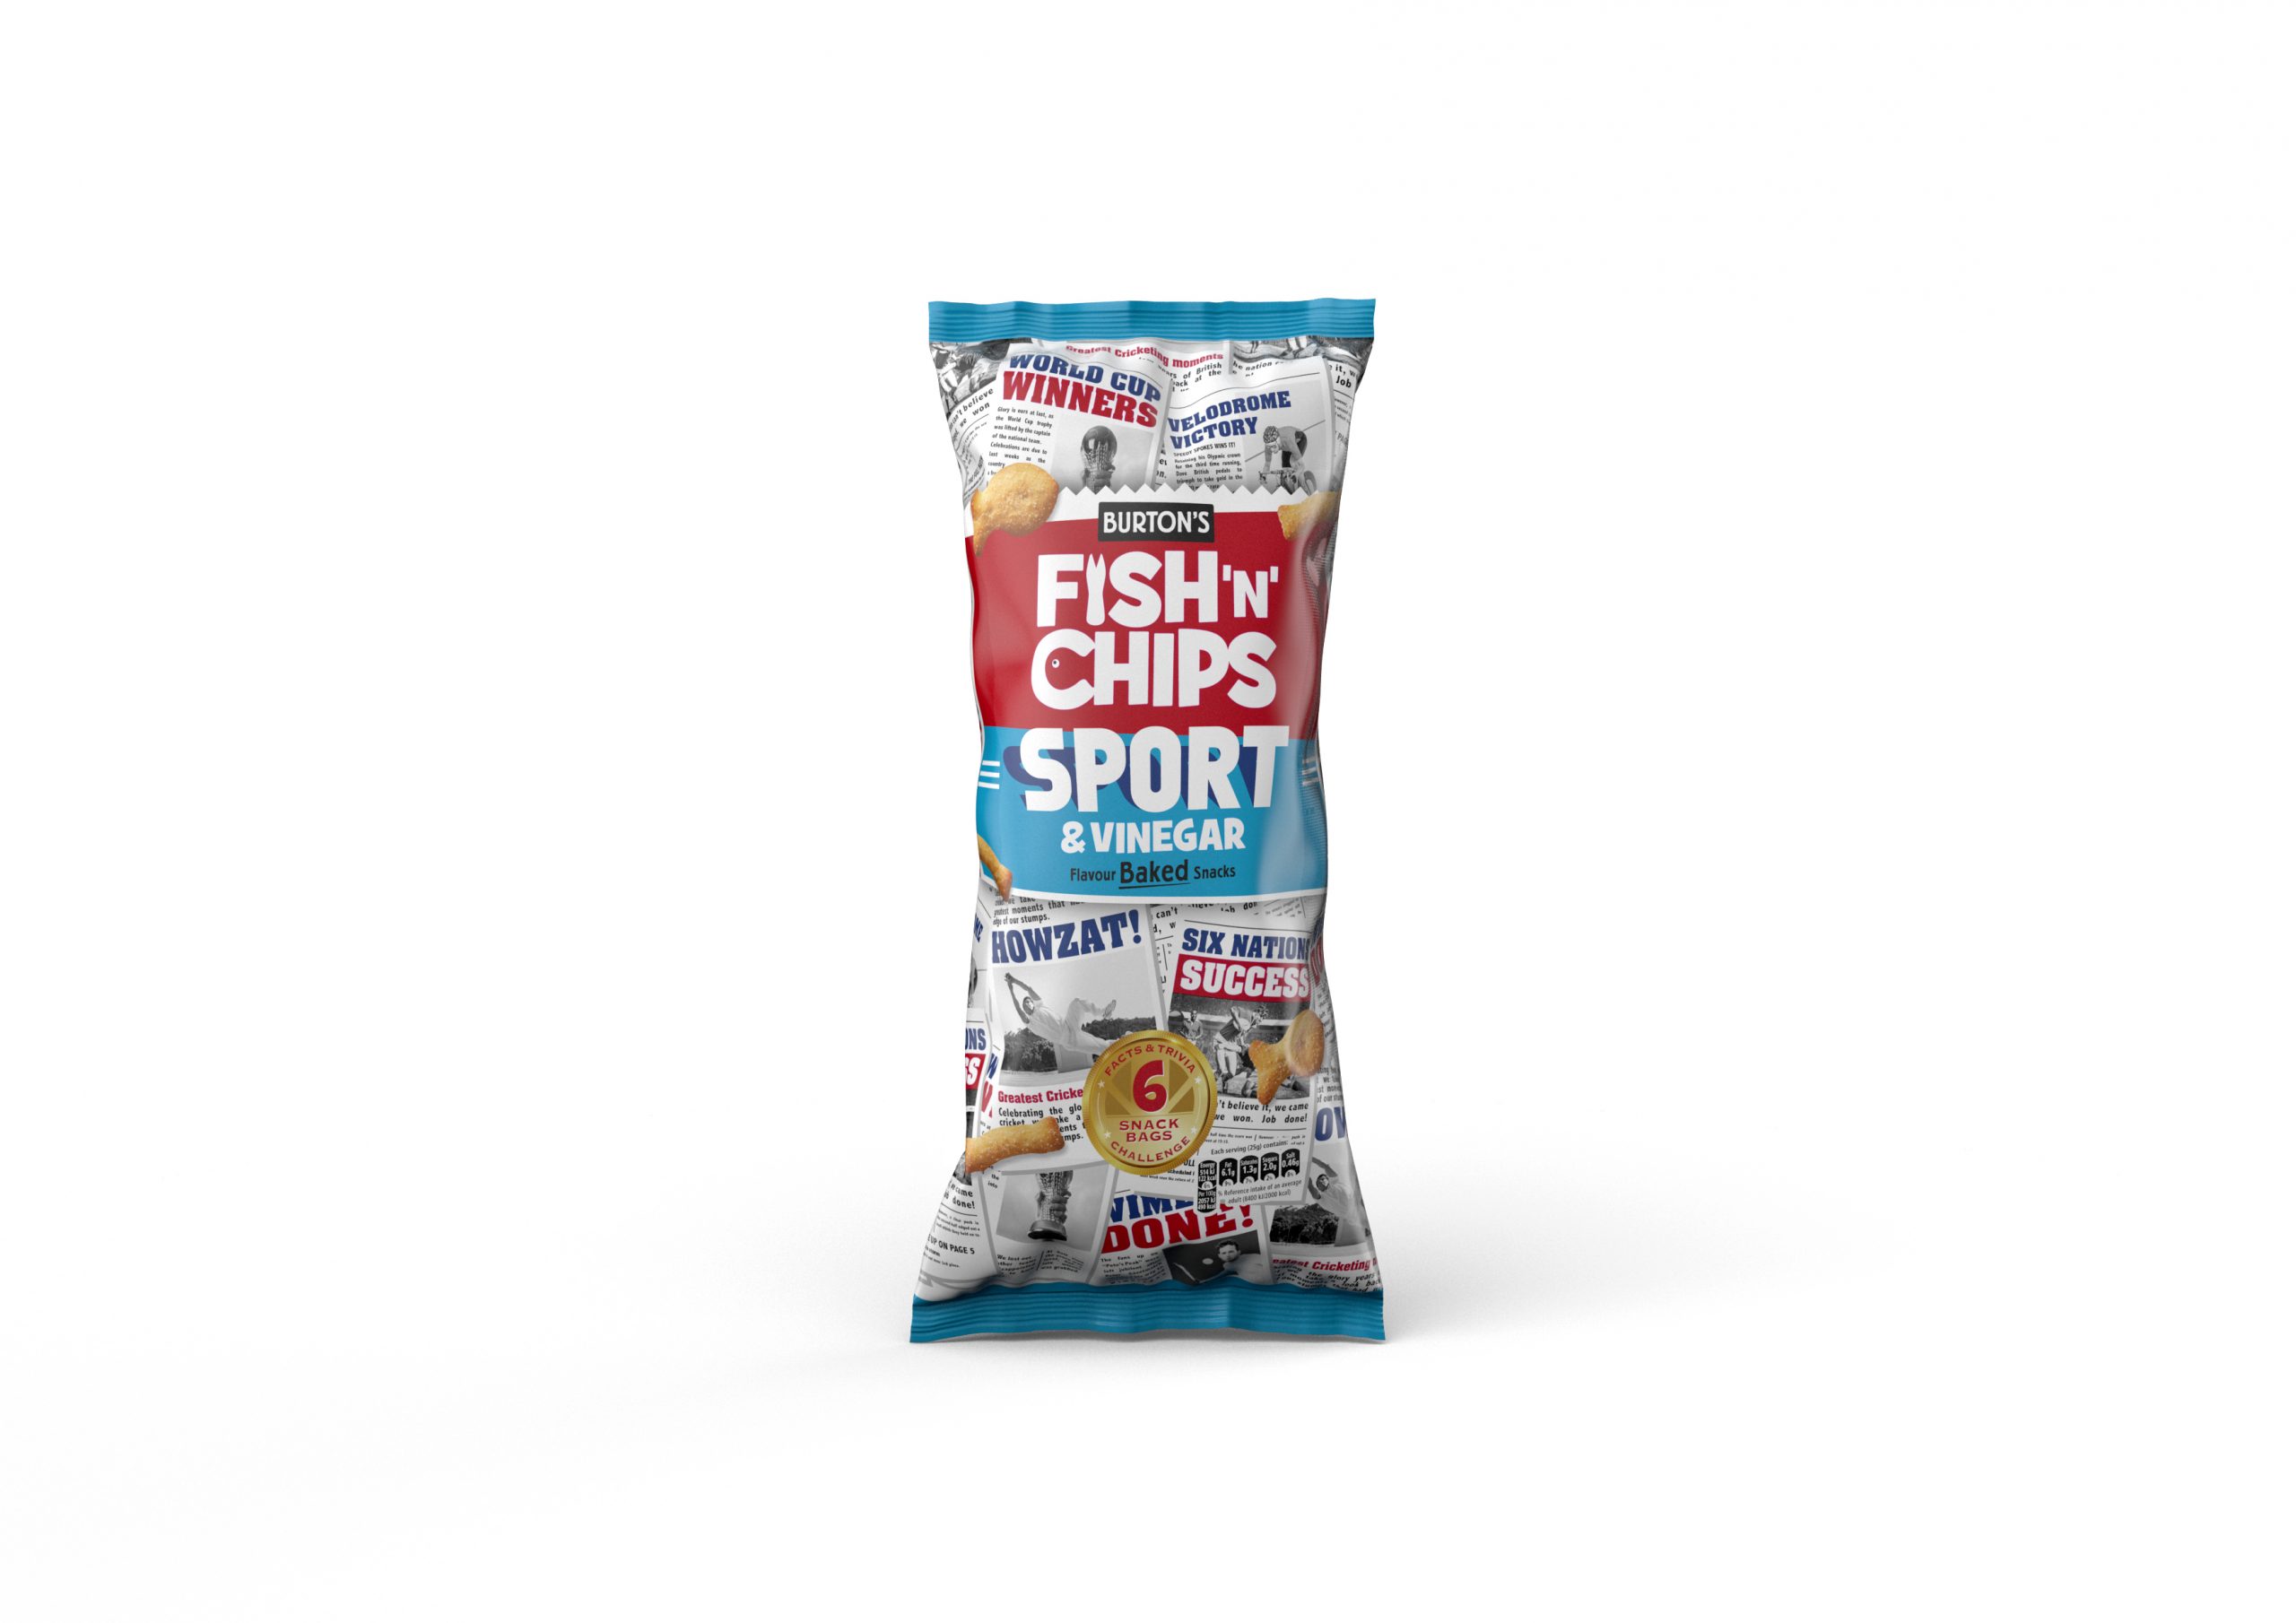 Burton’s gives Fish ‘N’ Chips a sporty new look